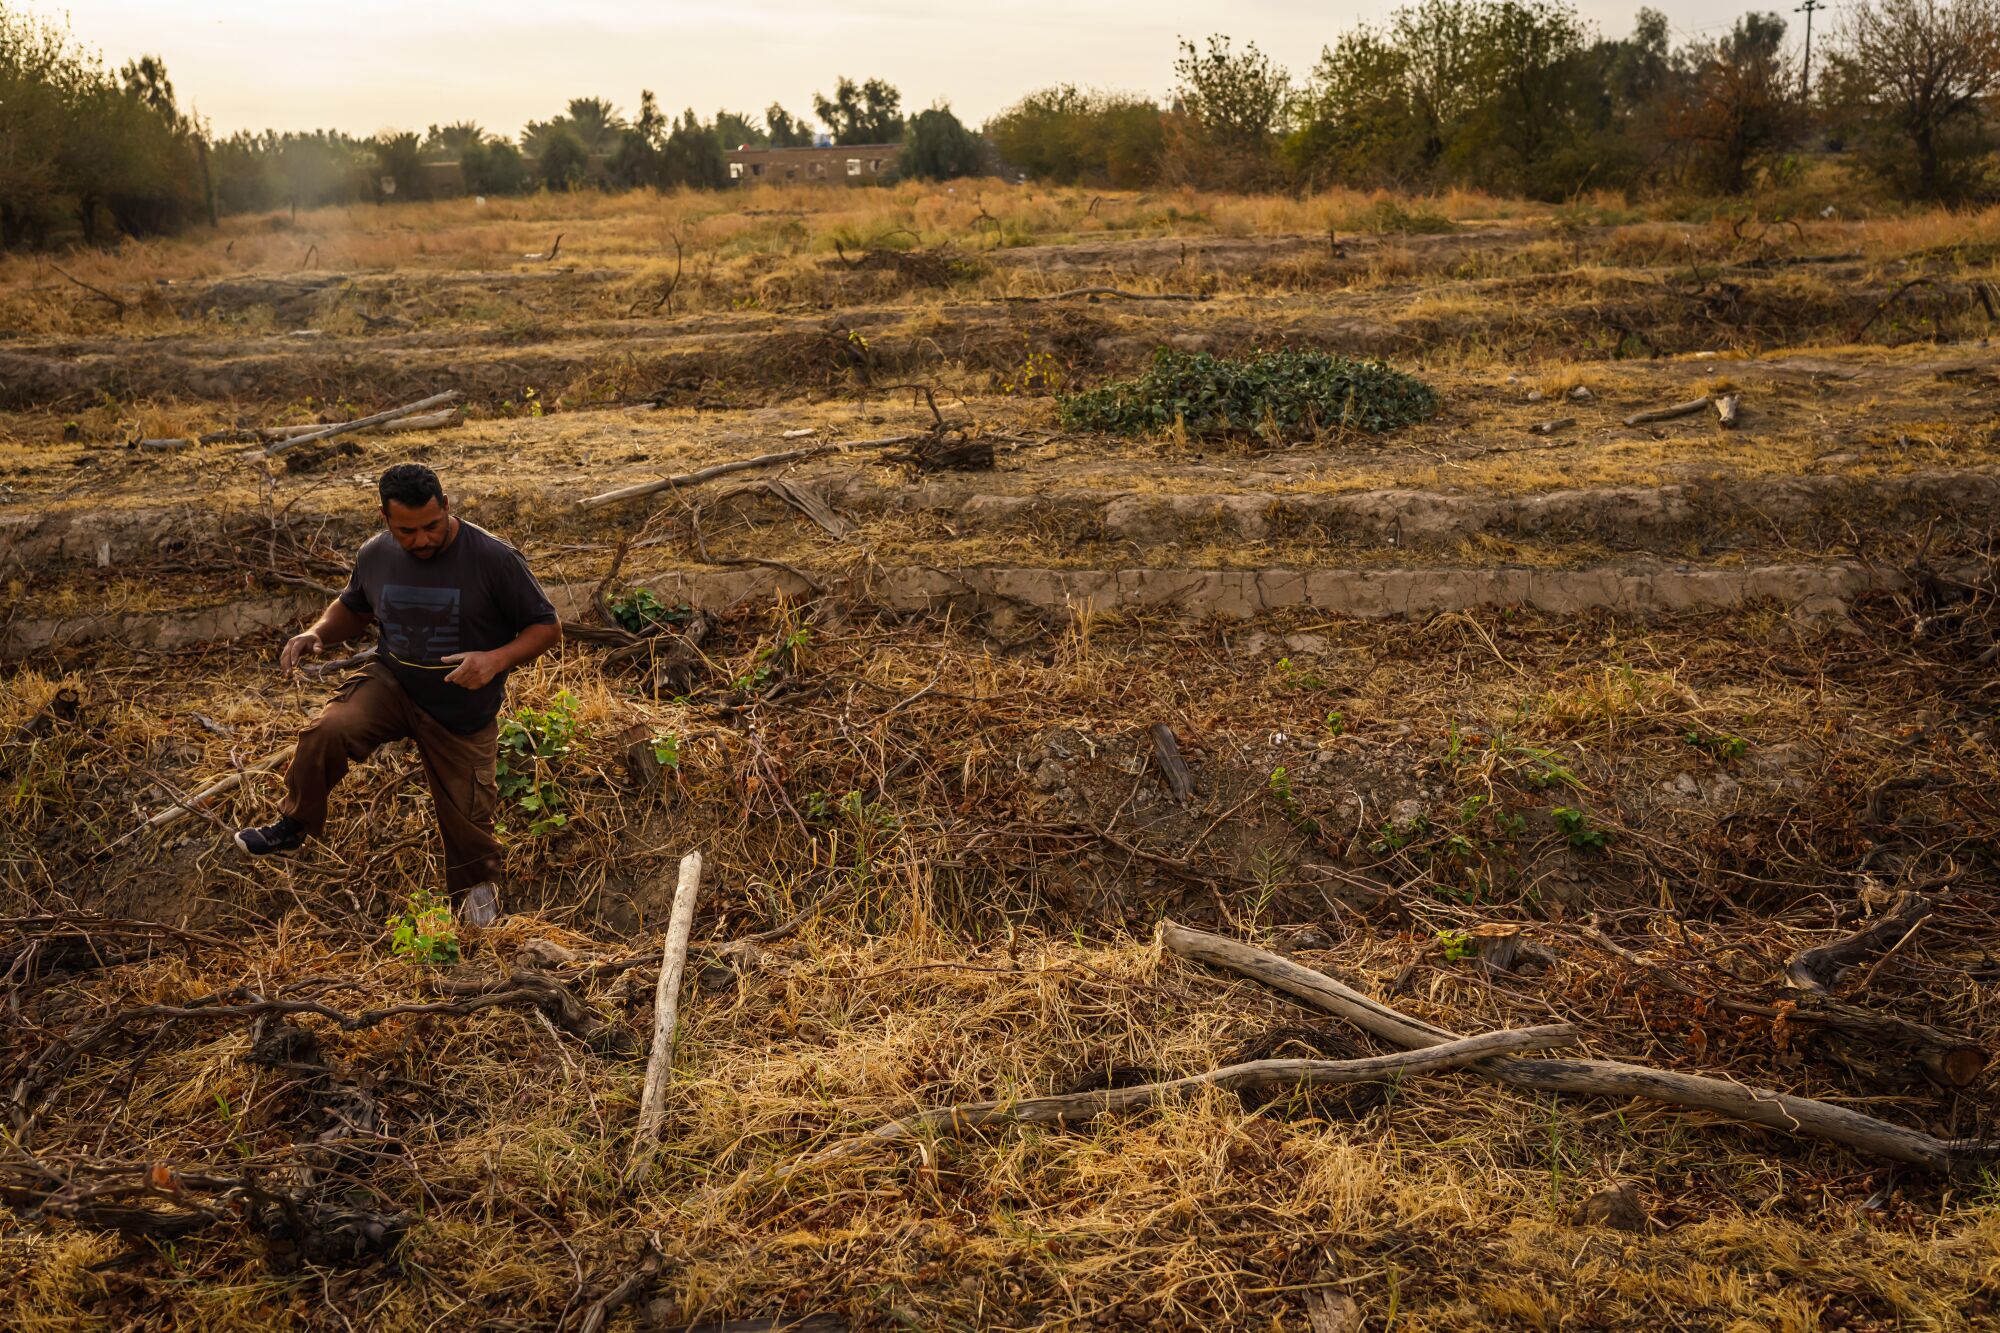 A man navigates a field with yellowing and dry vegetation